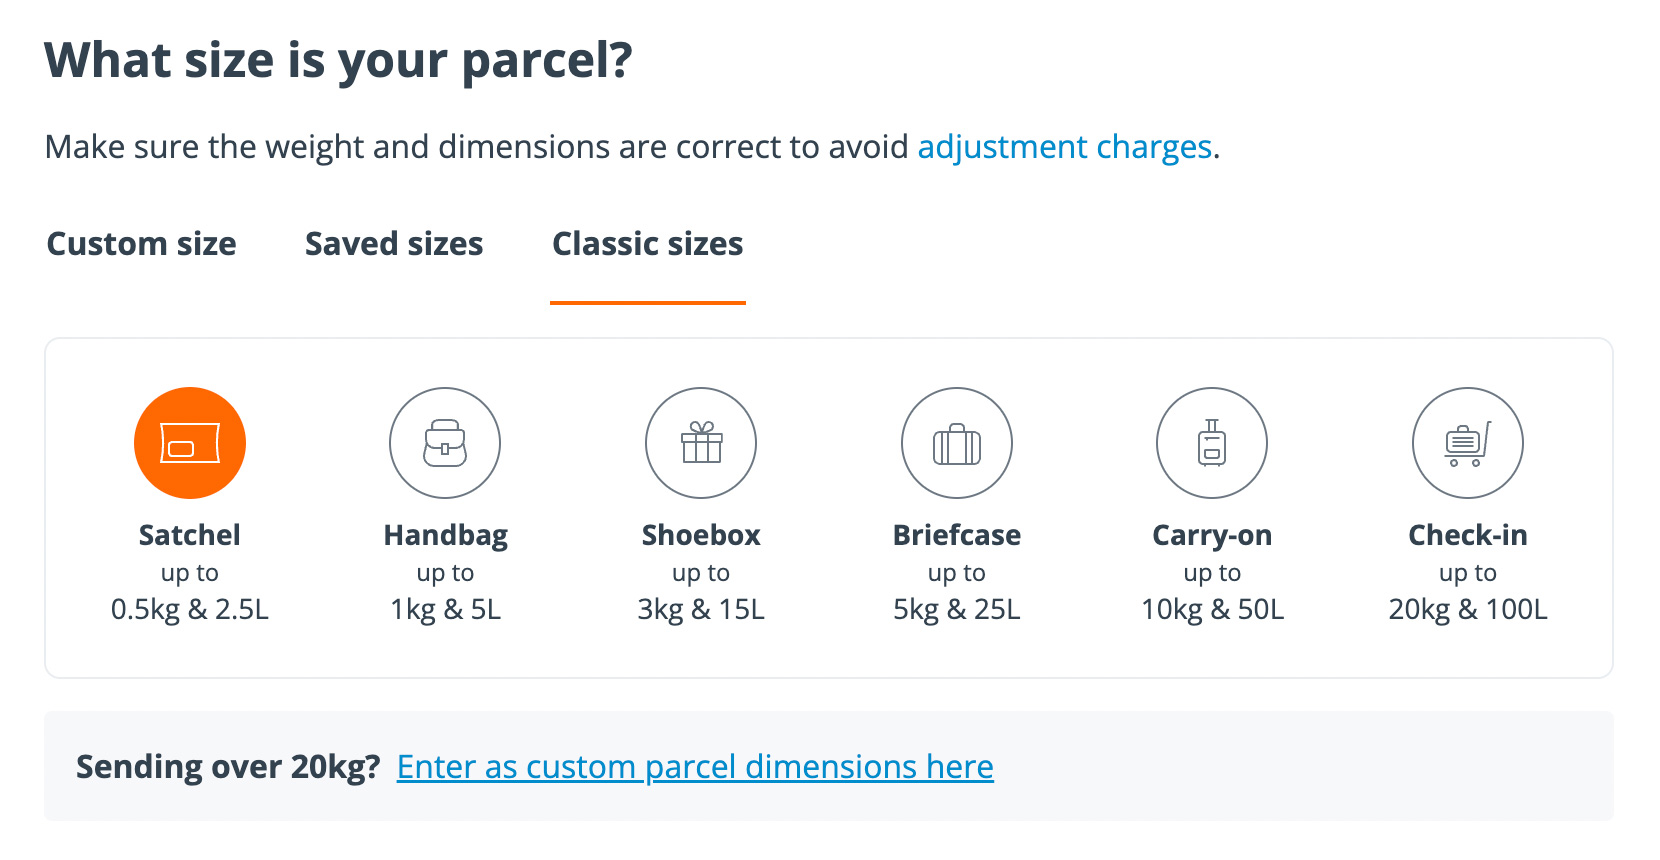 sendle-canada-parcel-sizes-dashboard-interface